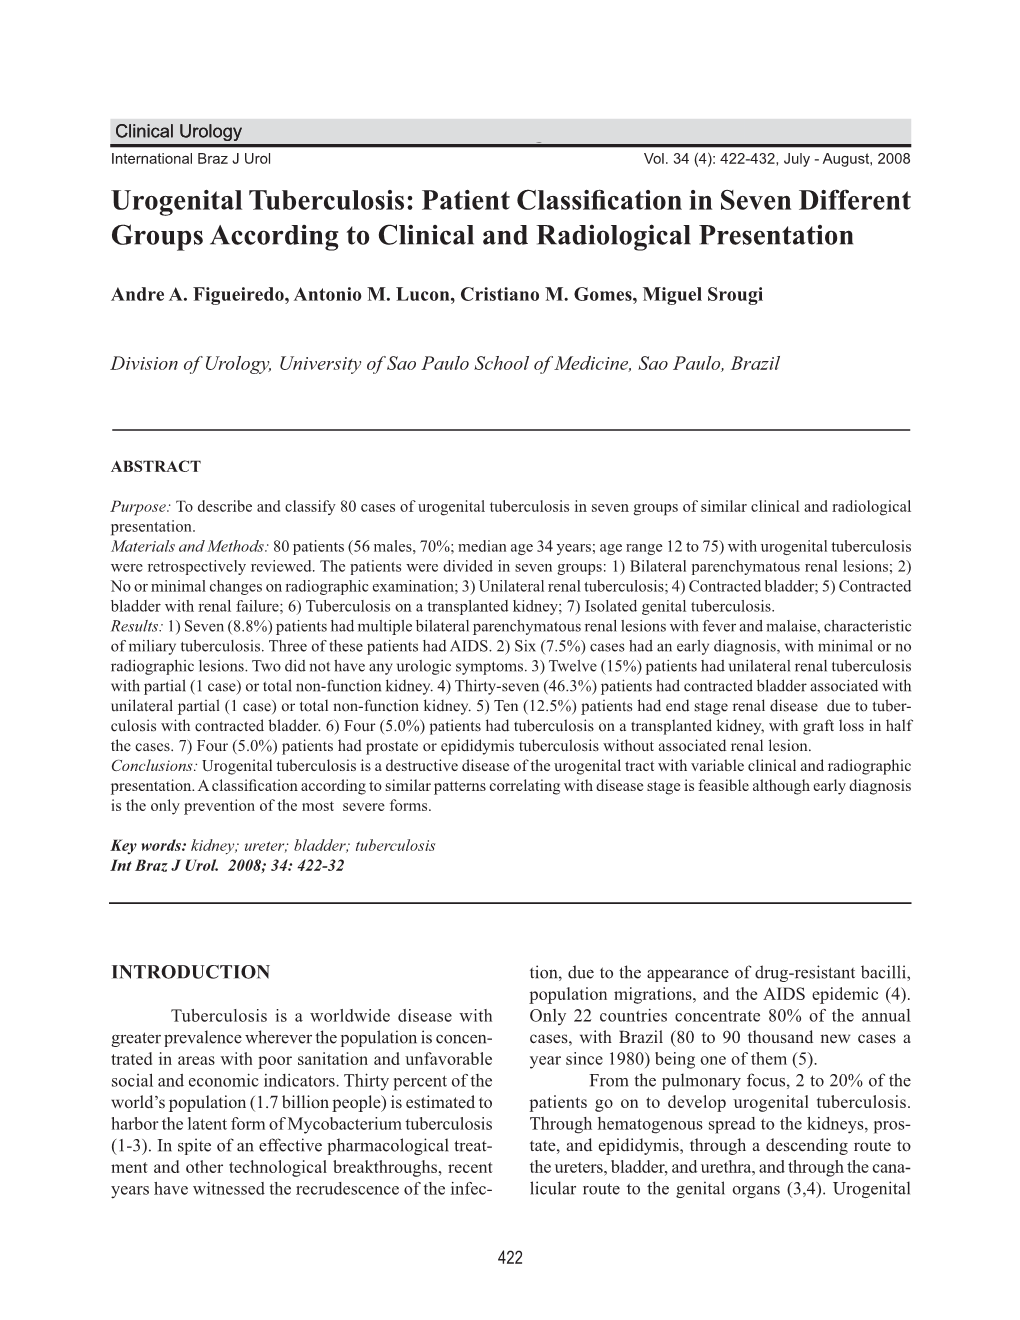 Urogenital Tuberculosis: Patient Classification in Seven Different